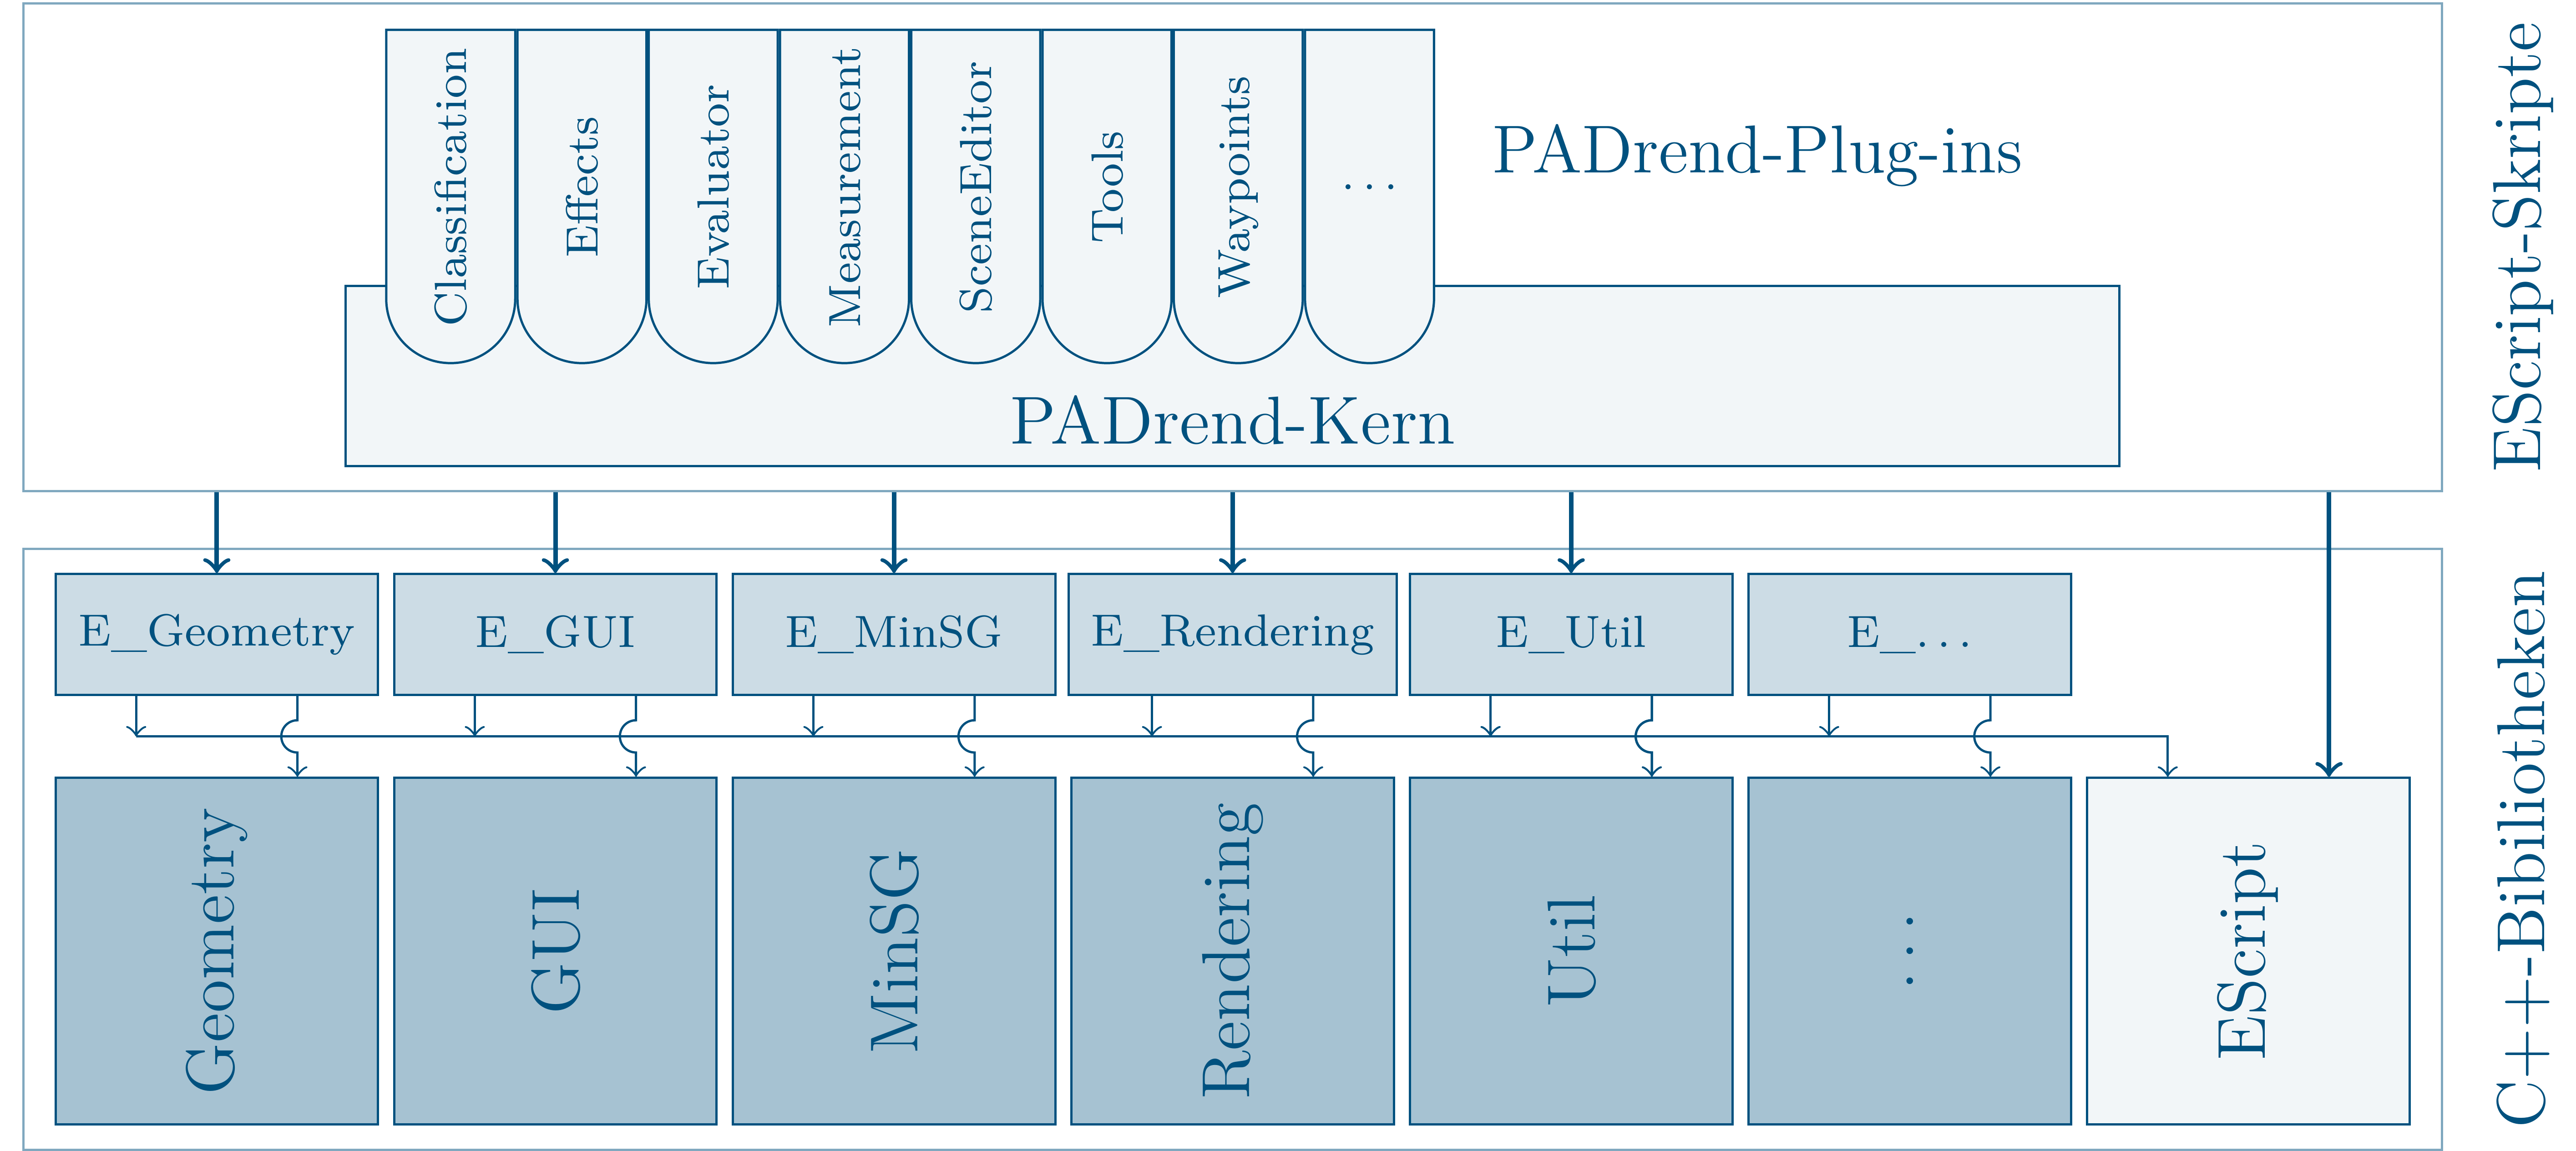 PADrends structure